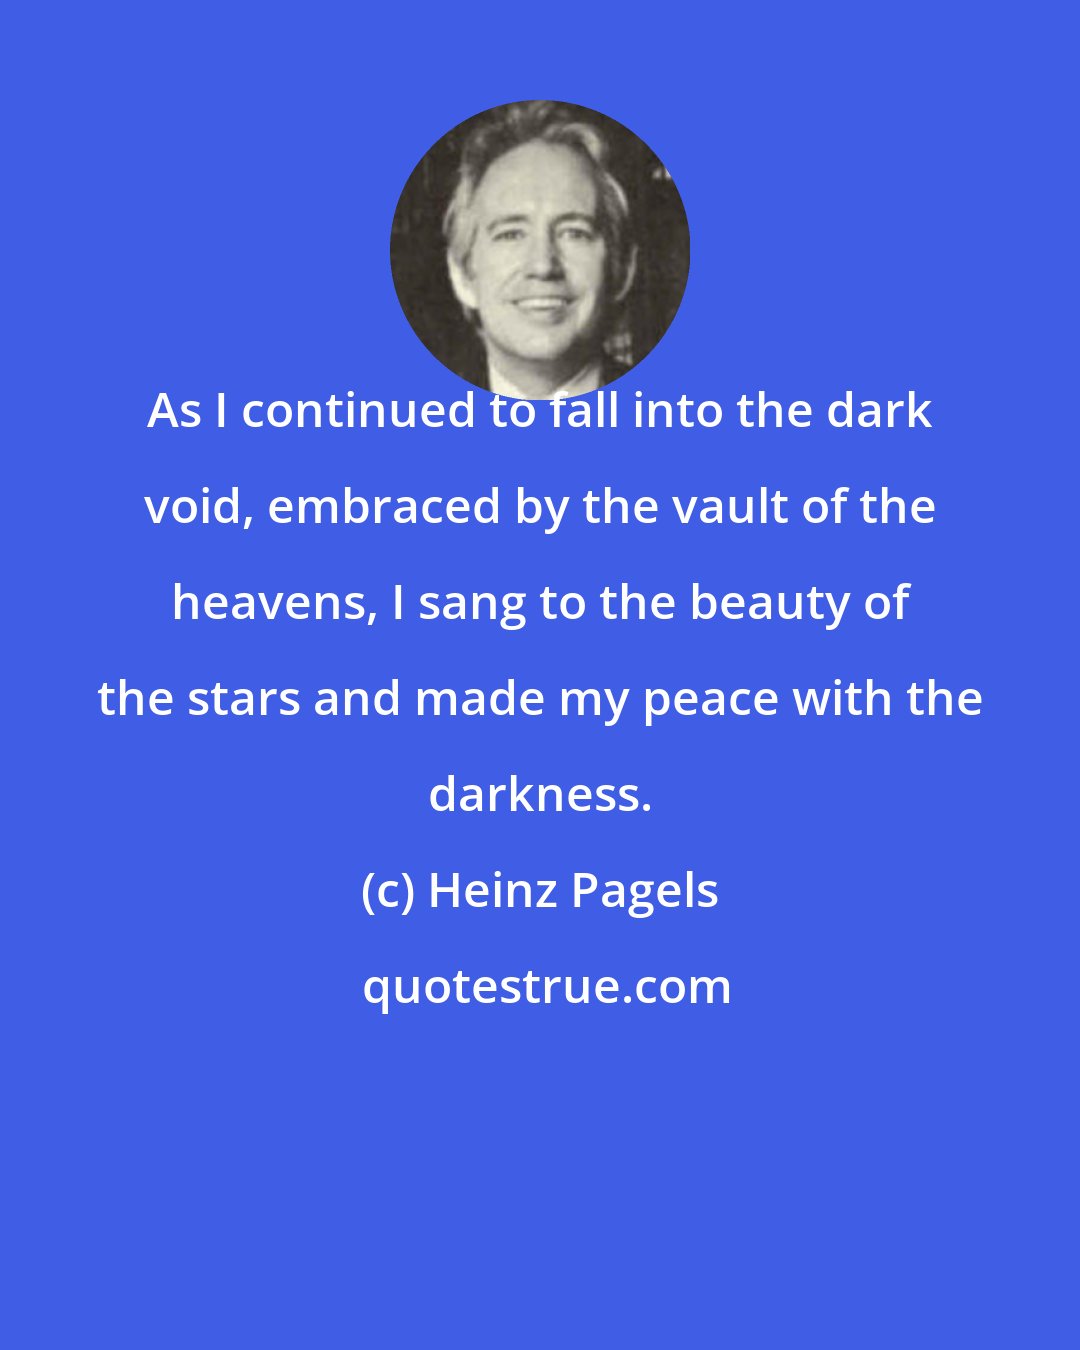 Heinz Pagels: As I continued to fall into the dark void, embraced by the vault of the heavens, I sang to the beauty of the stars and made my peace with the darkness.